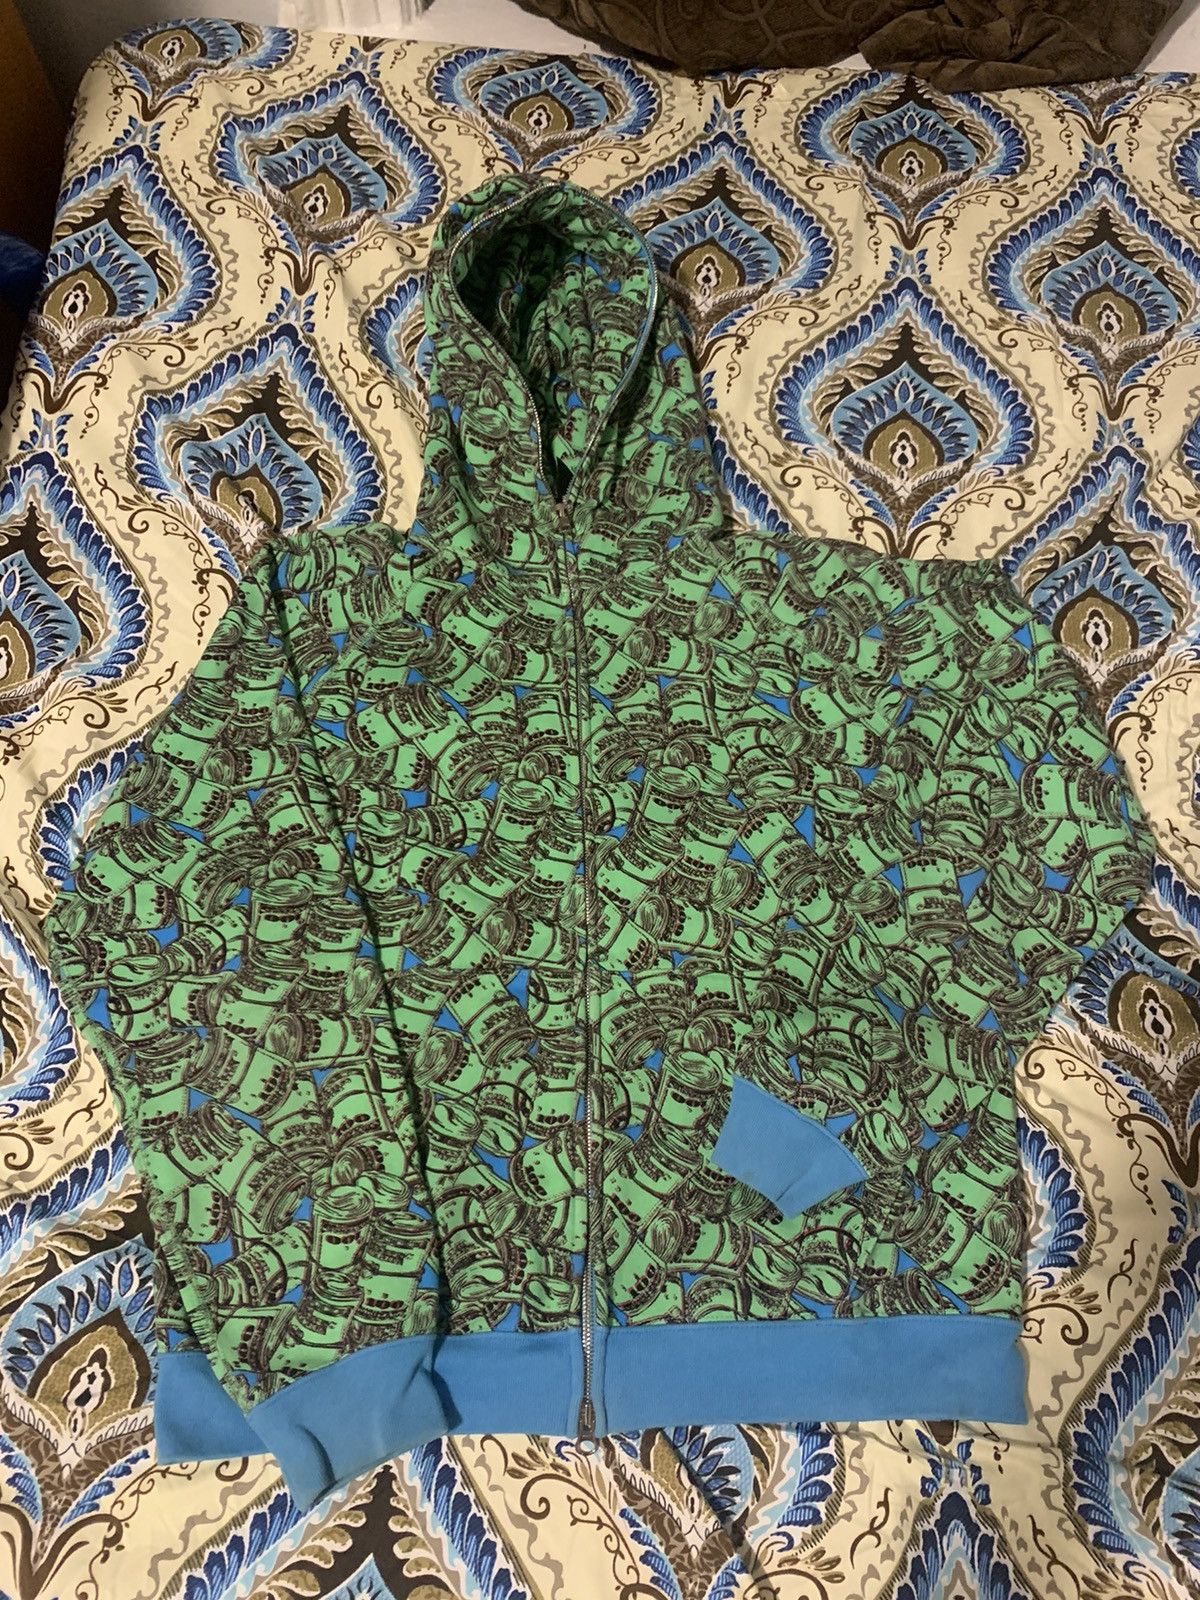 Billionaire Boys Club Billionaire Boys Club Hoodie Og money roll hoodie Size US S / EU 44-46 / 1 - 1 Preview